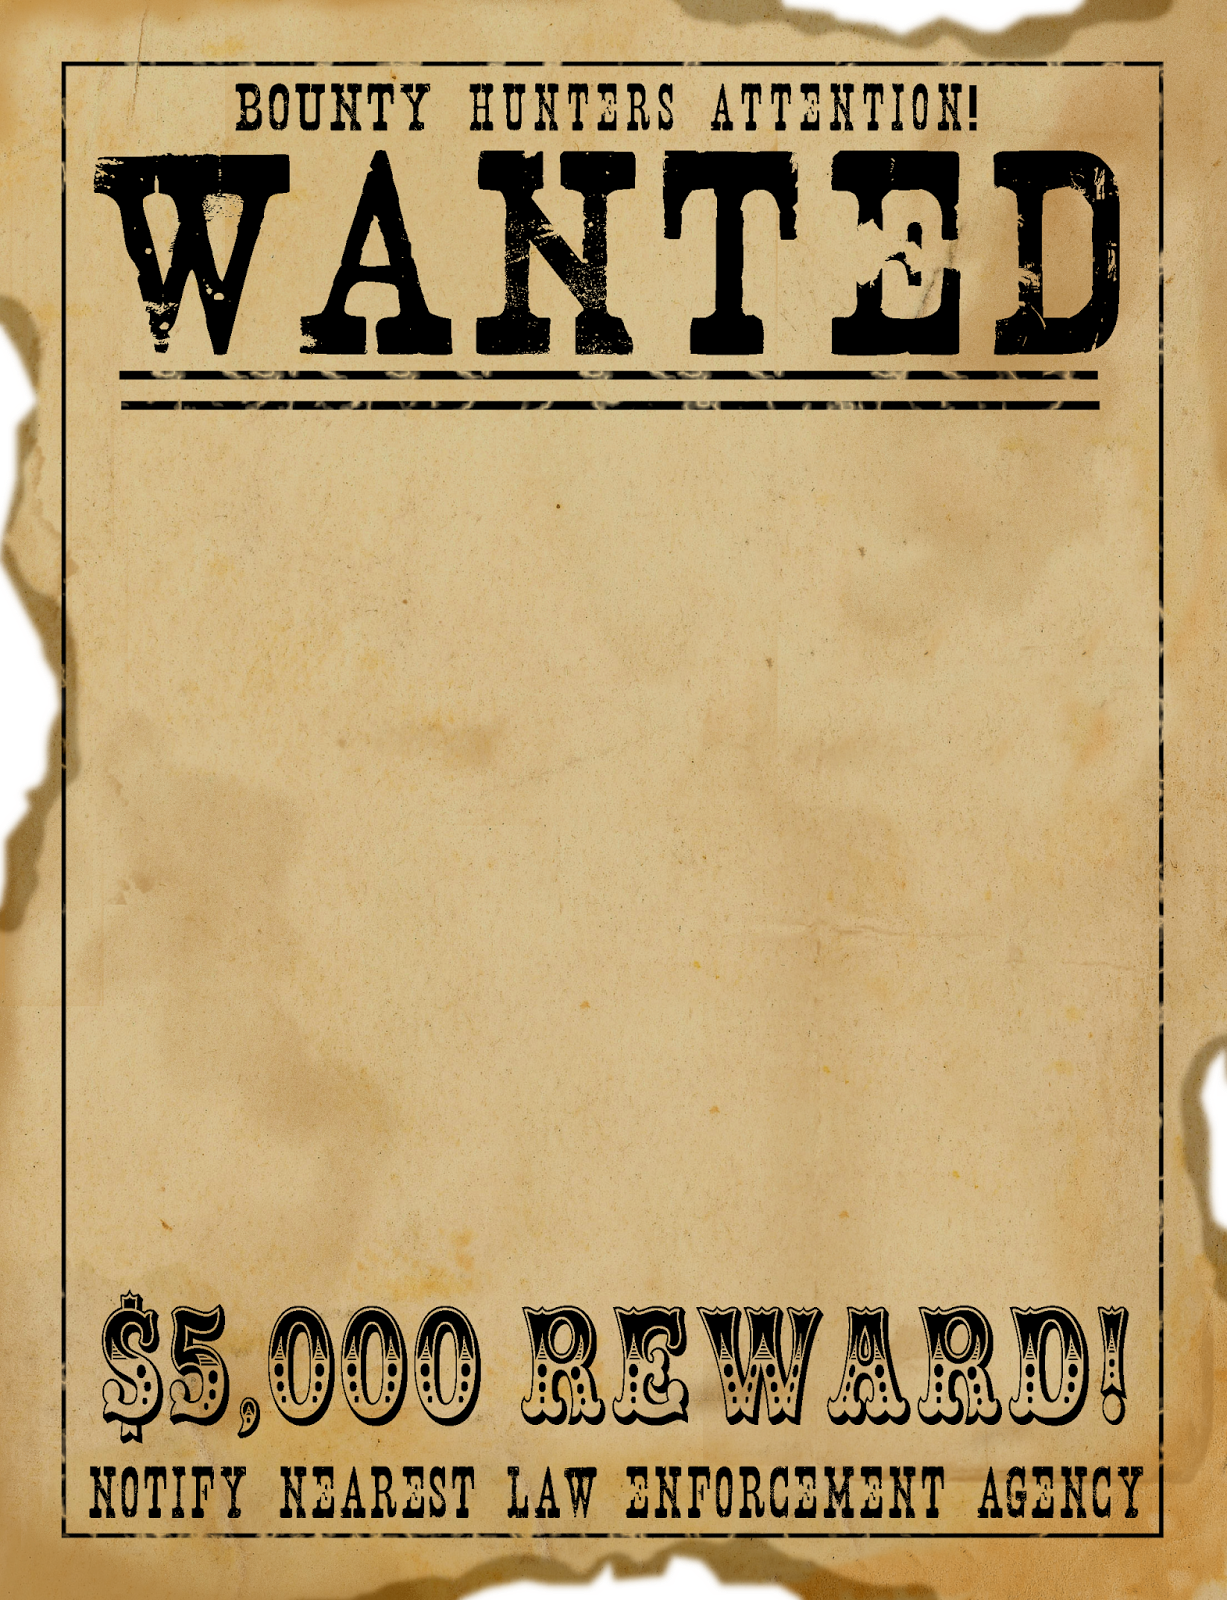 This Is A Vintage Style Wanted Poster Like The Kind From The Wild West